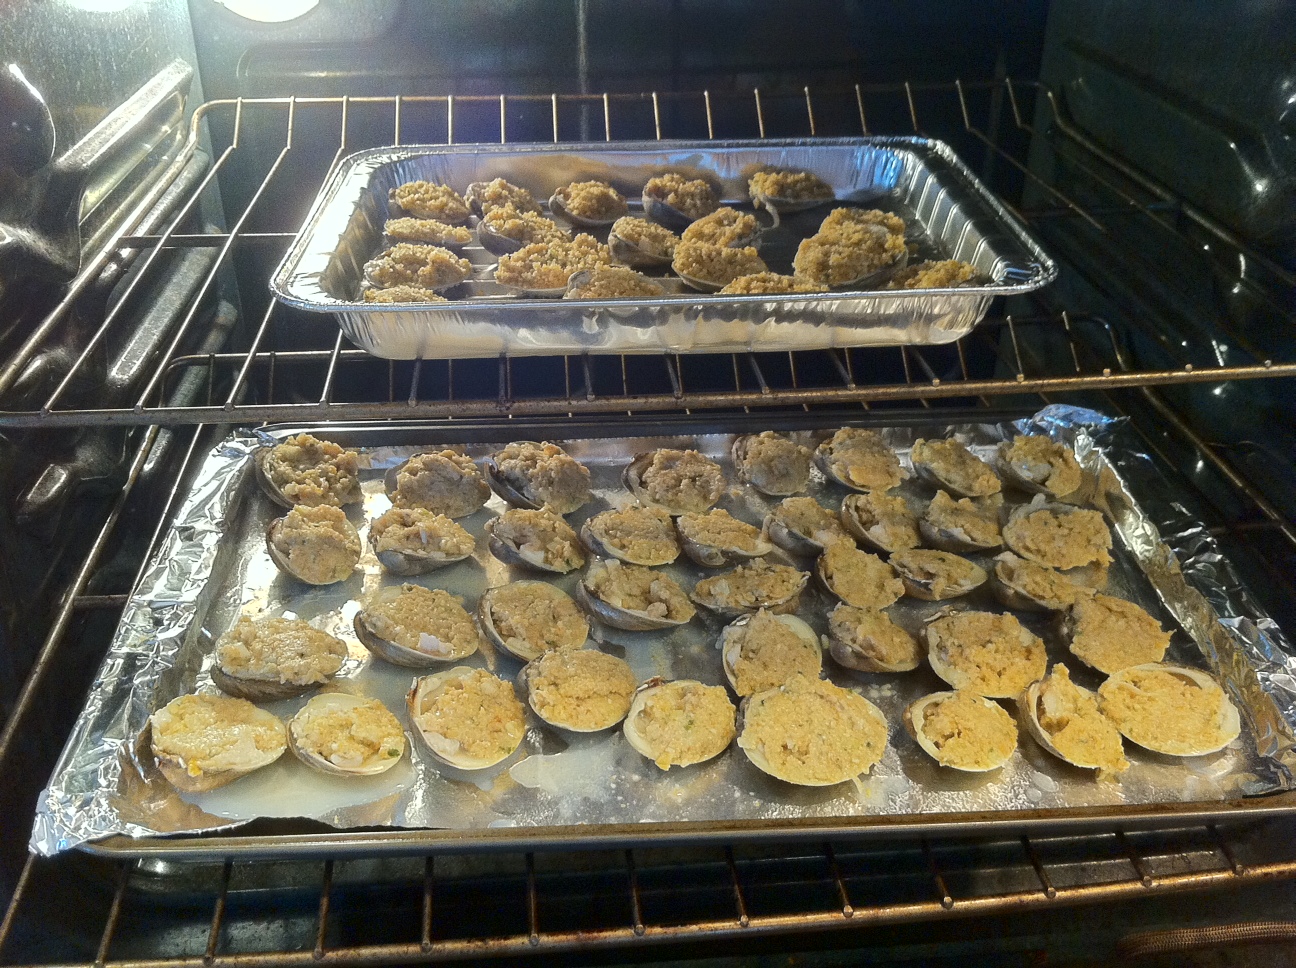 Baked Clams In The Oven!